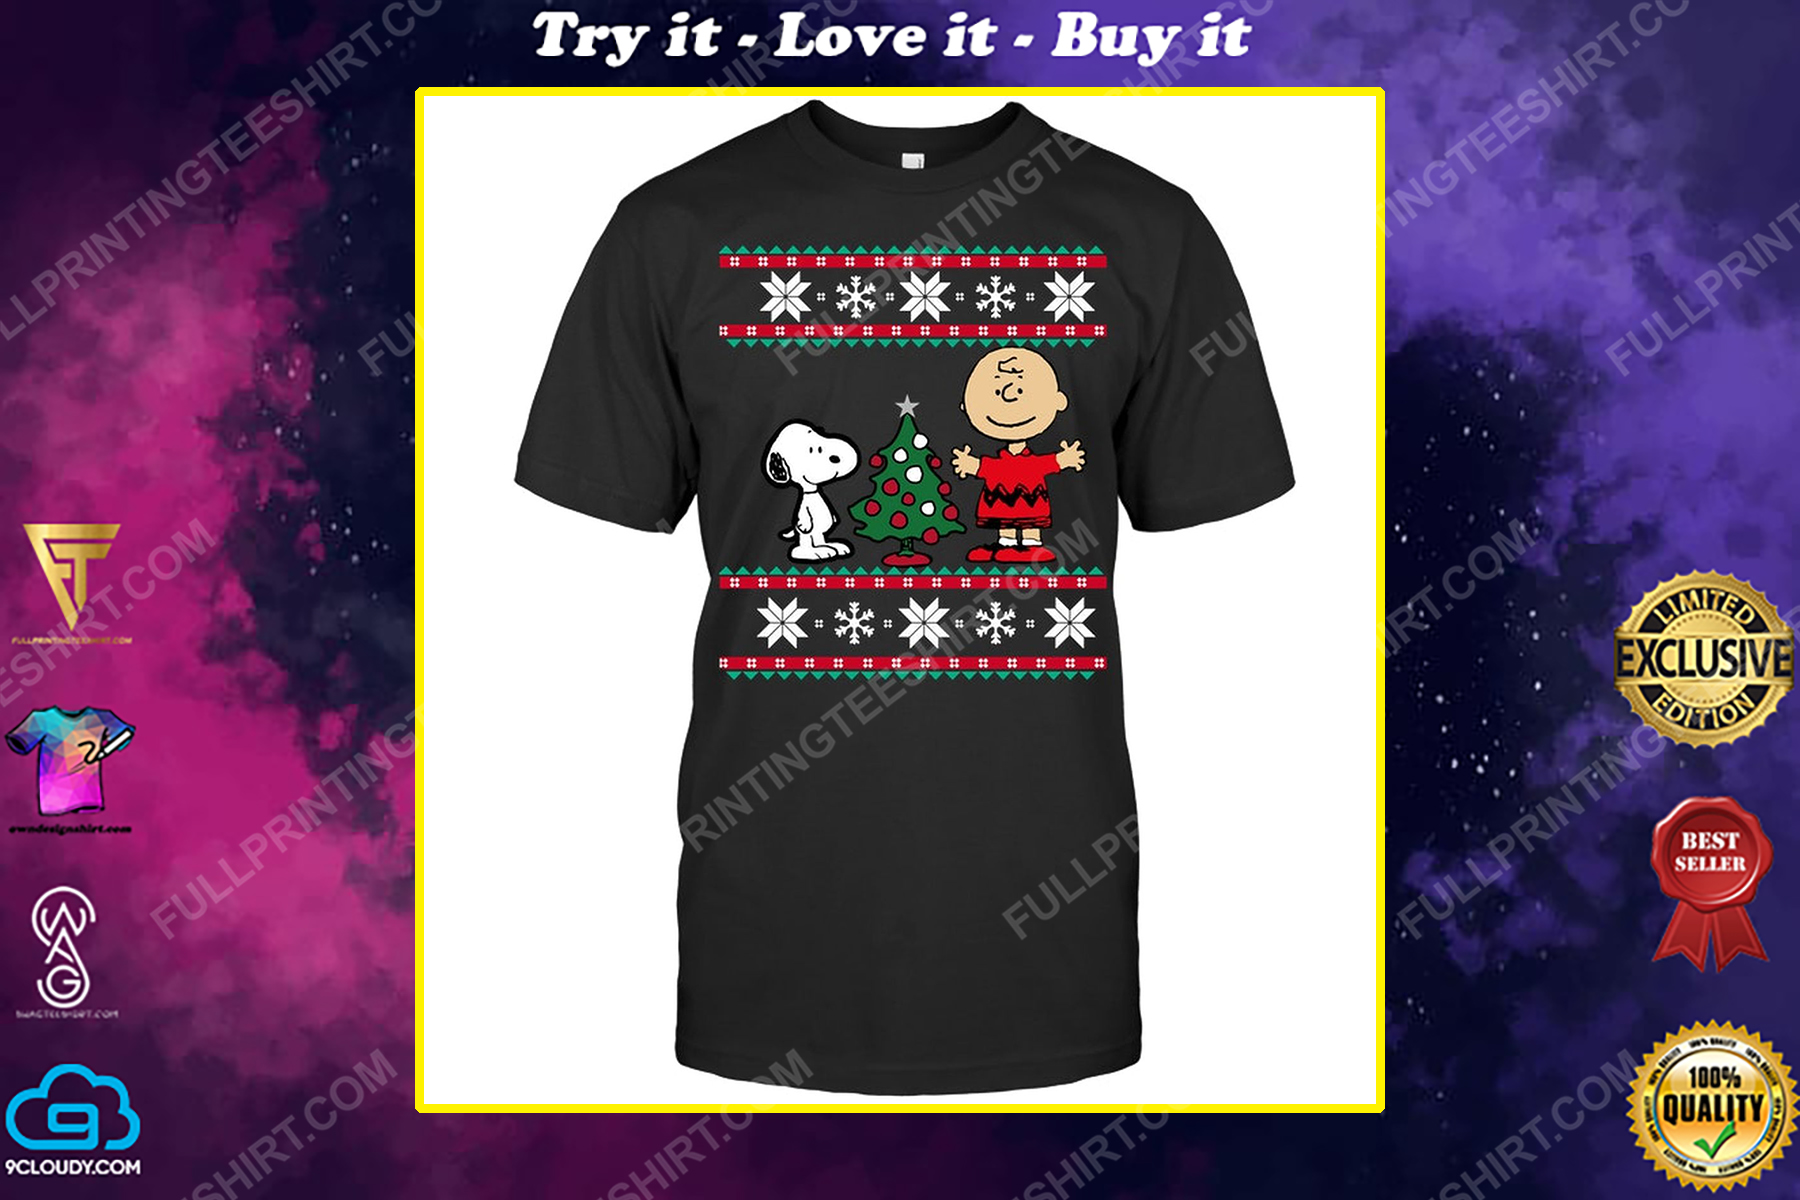 Charlie brown and snoopy with christmas tree shirt